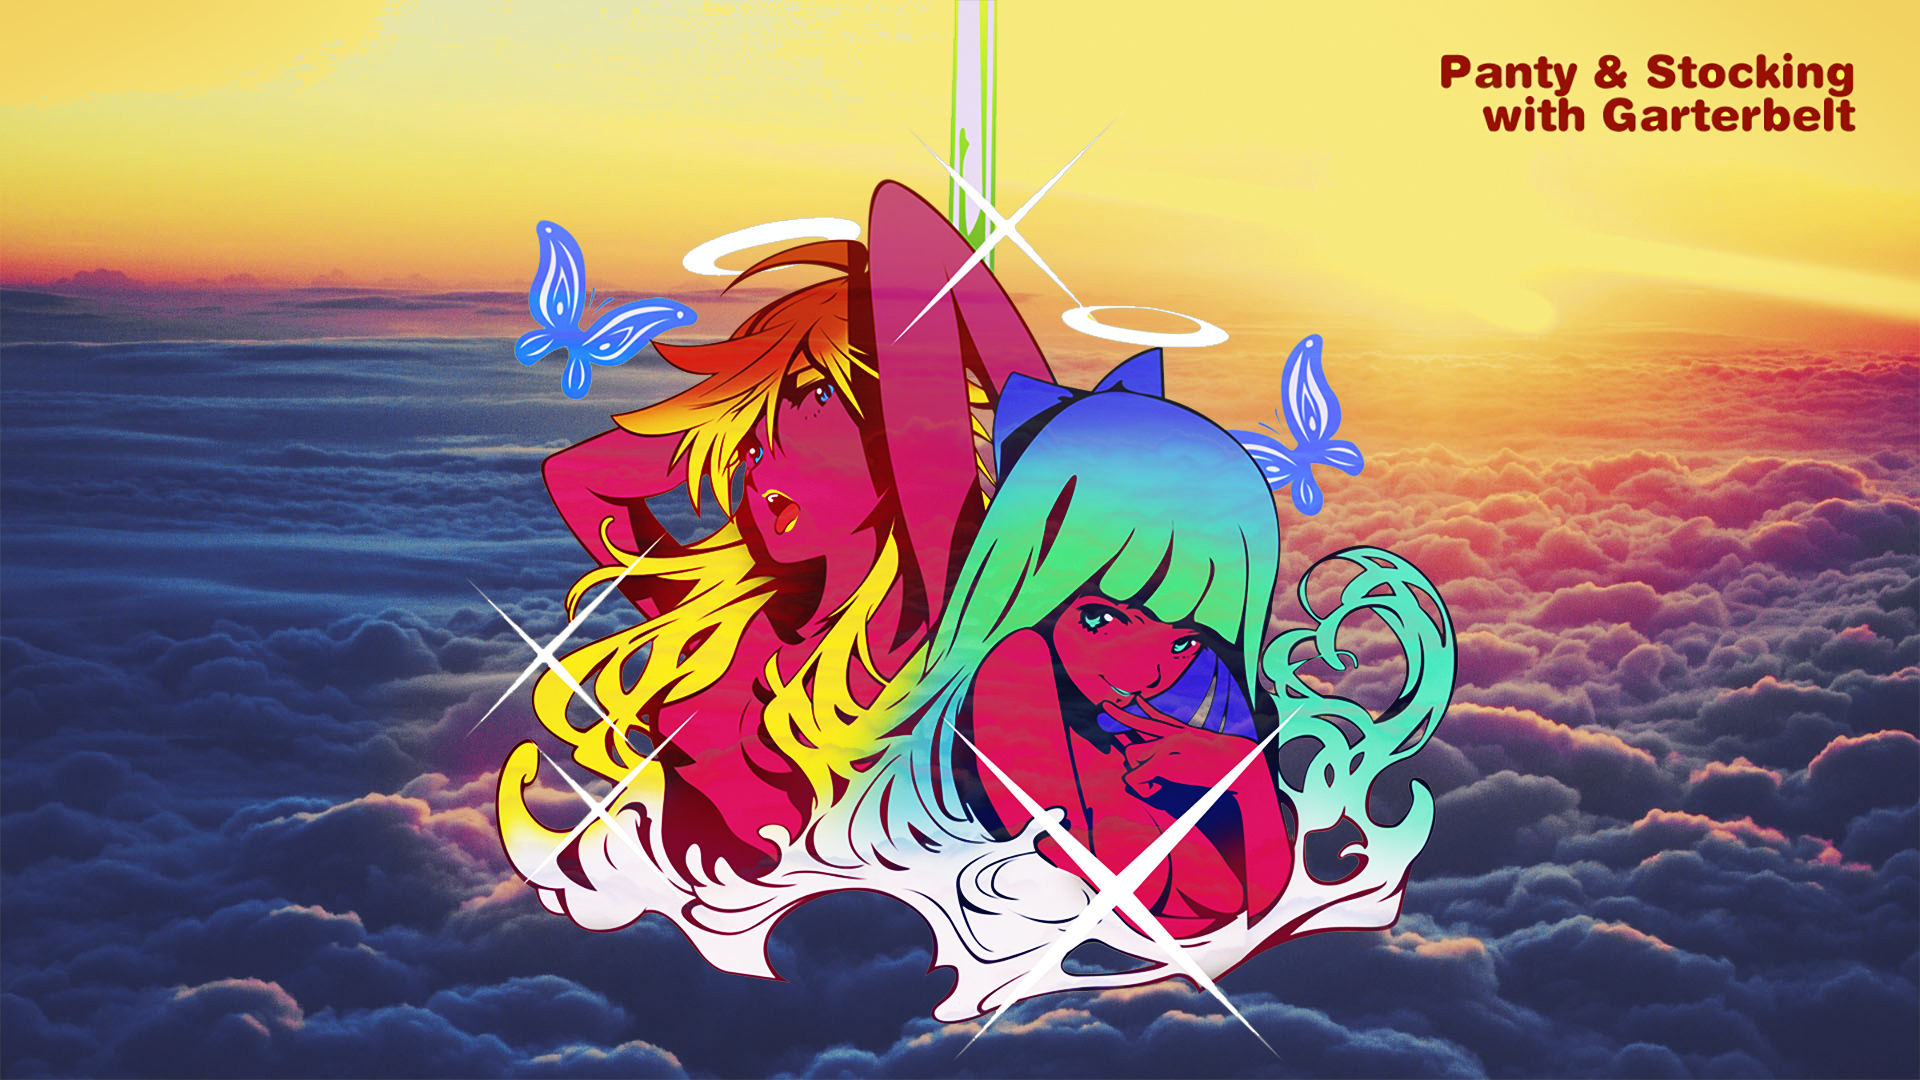 Anime 1920x1080 Panty and Stocking with Garterbelt album covers Anarchy Panty Anarchy Stocking